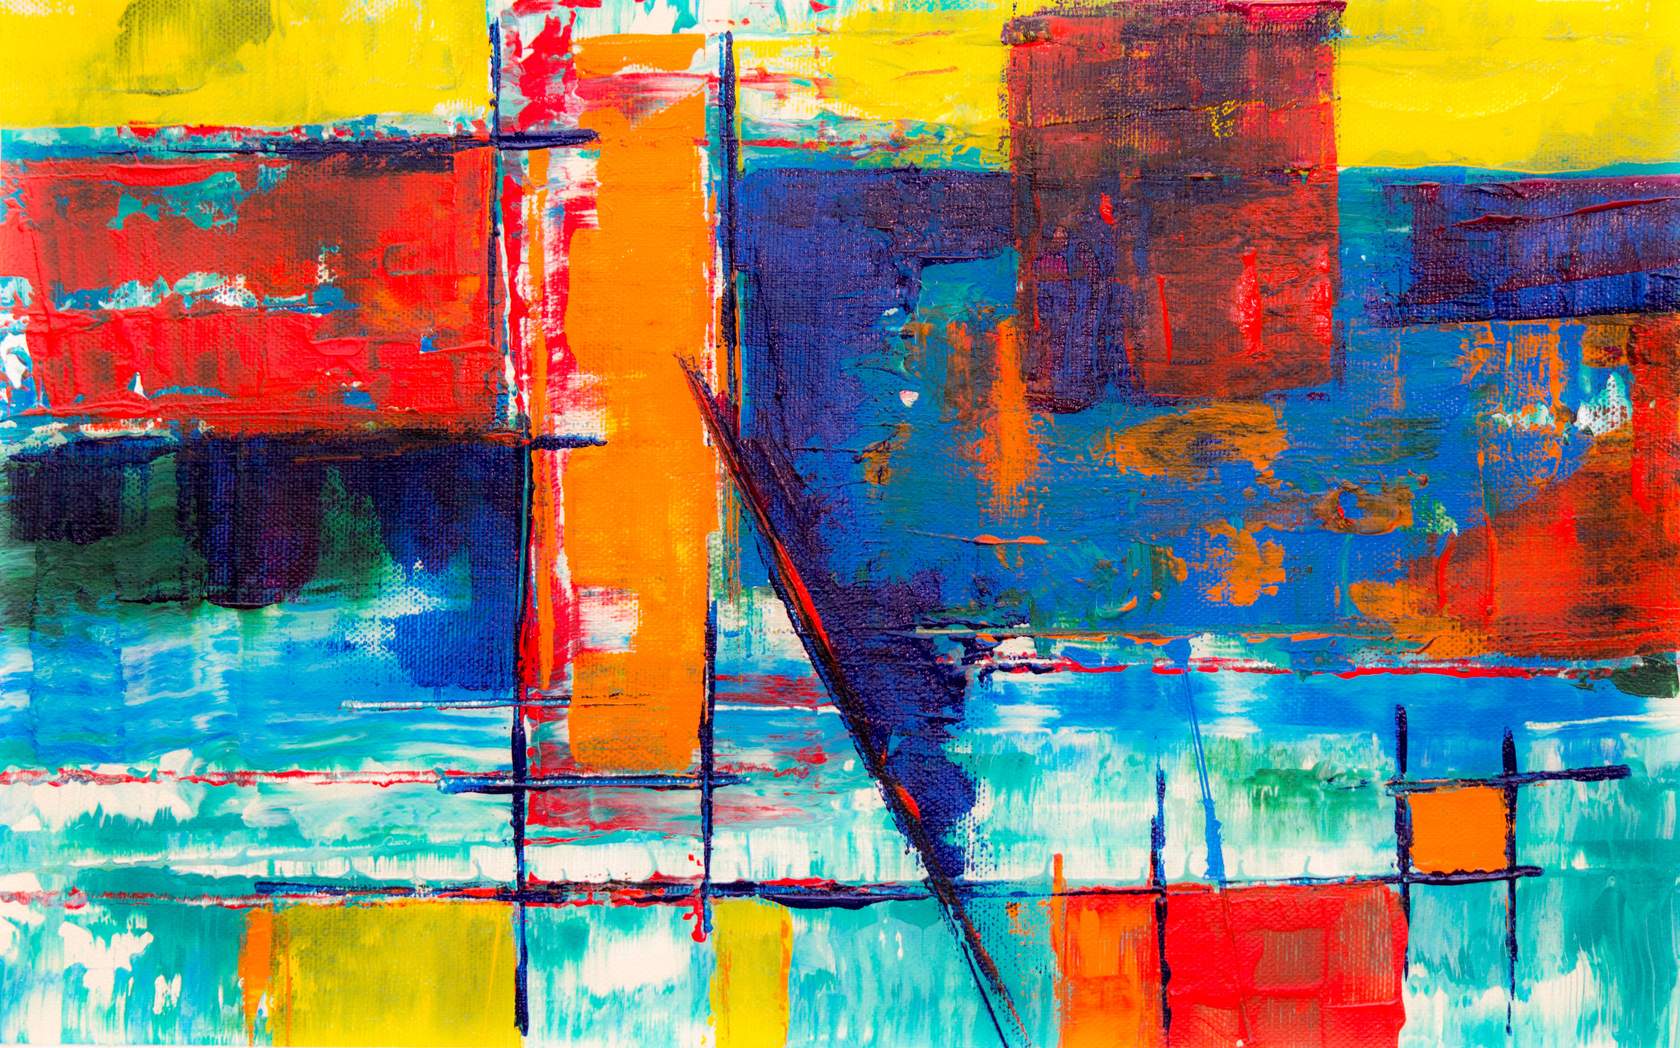 An abstract painting with primary colors.